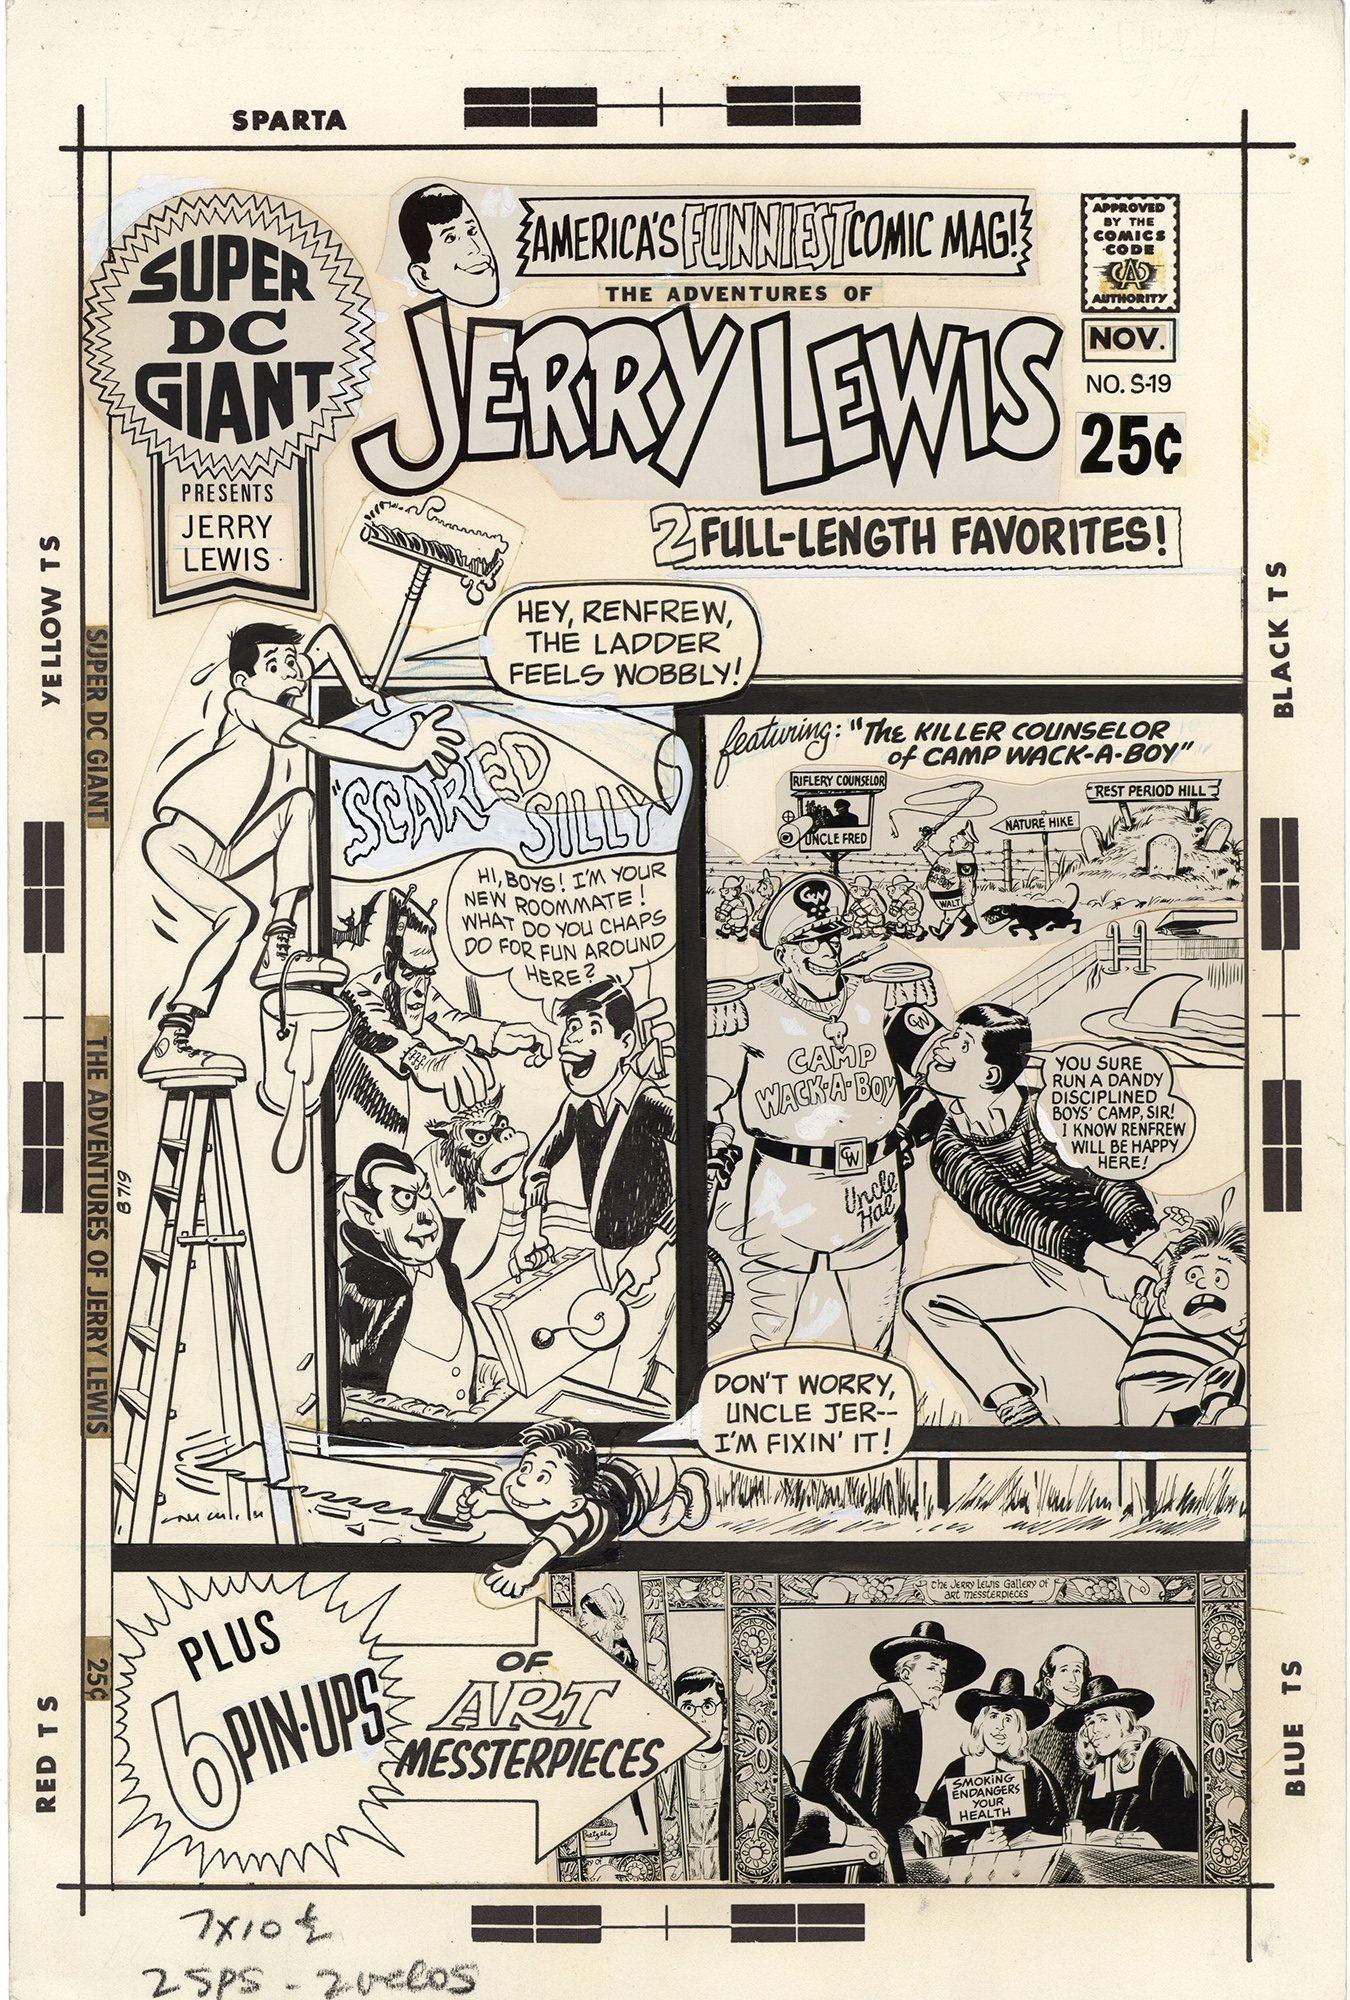 Super DC Giant (Adventures of Jerry Lewis) #S-19 Cover